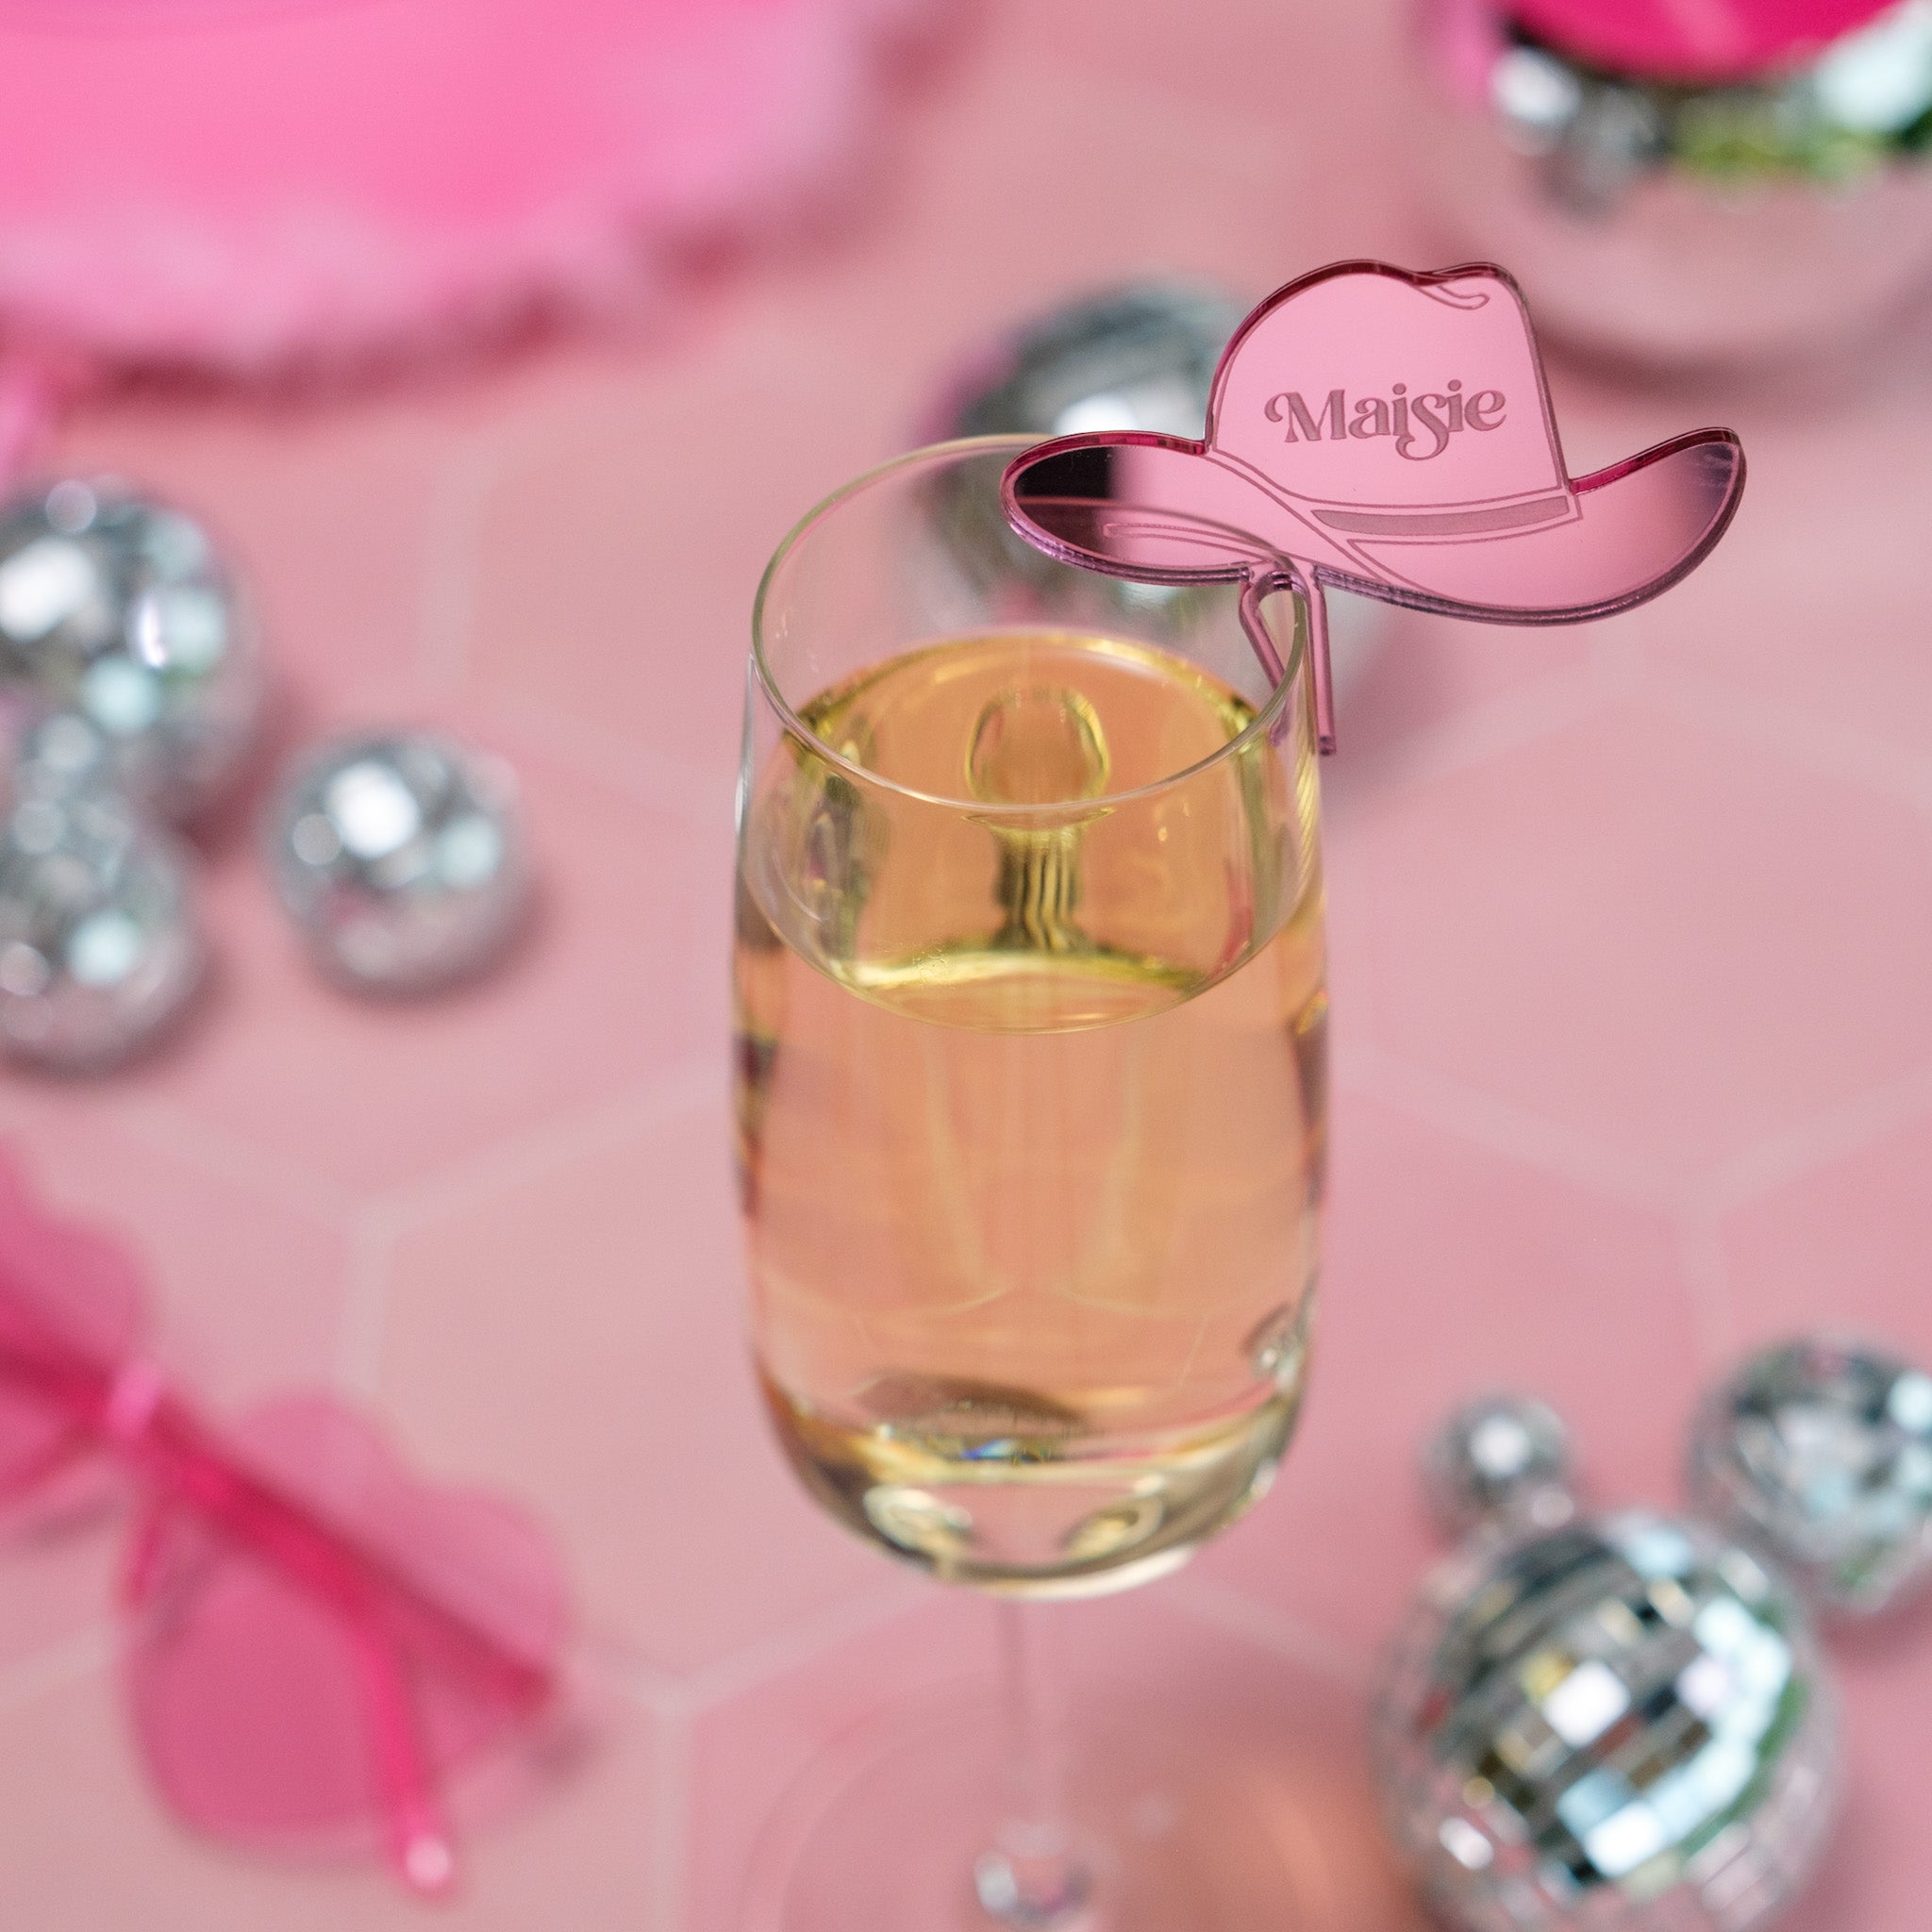 Hen party decorations